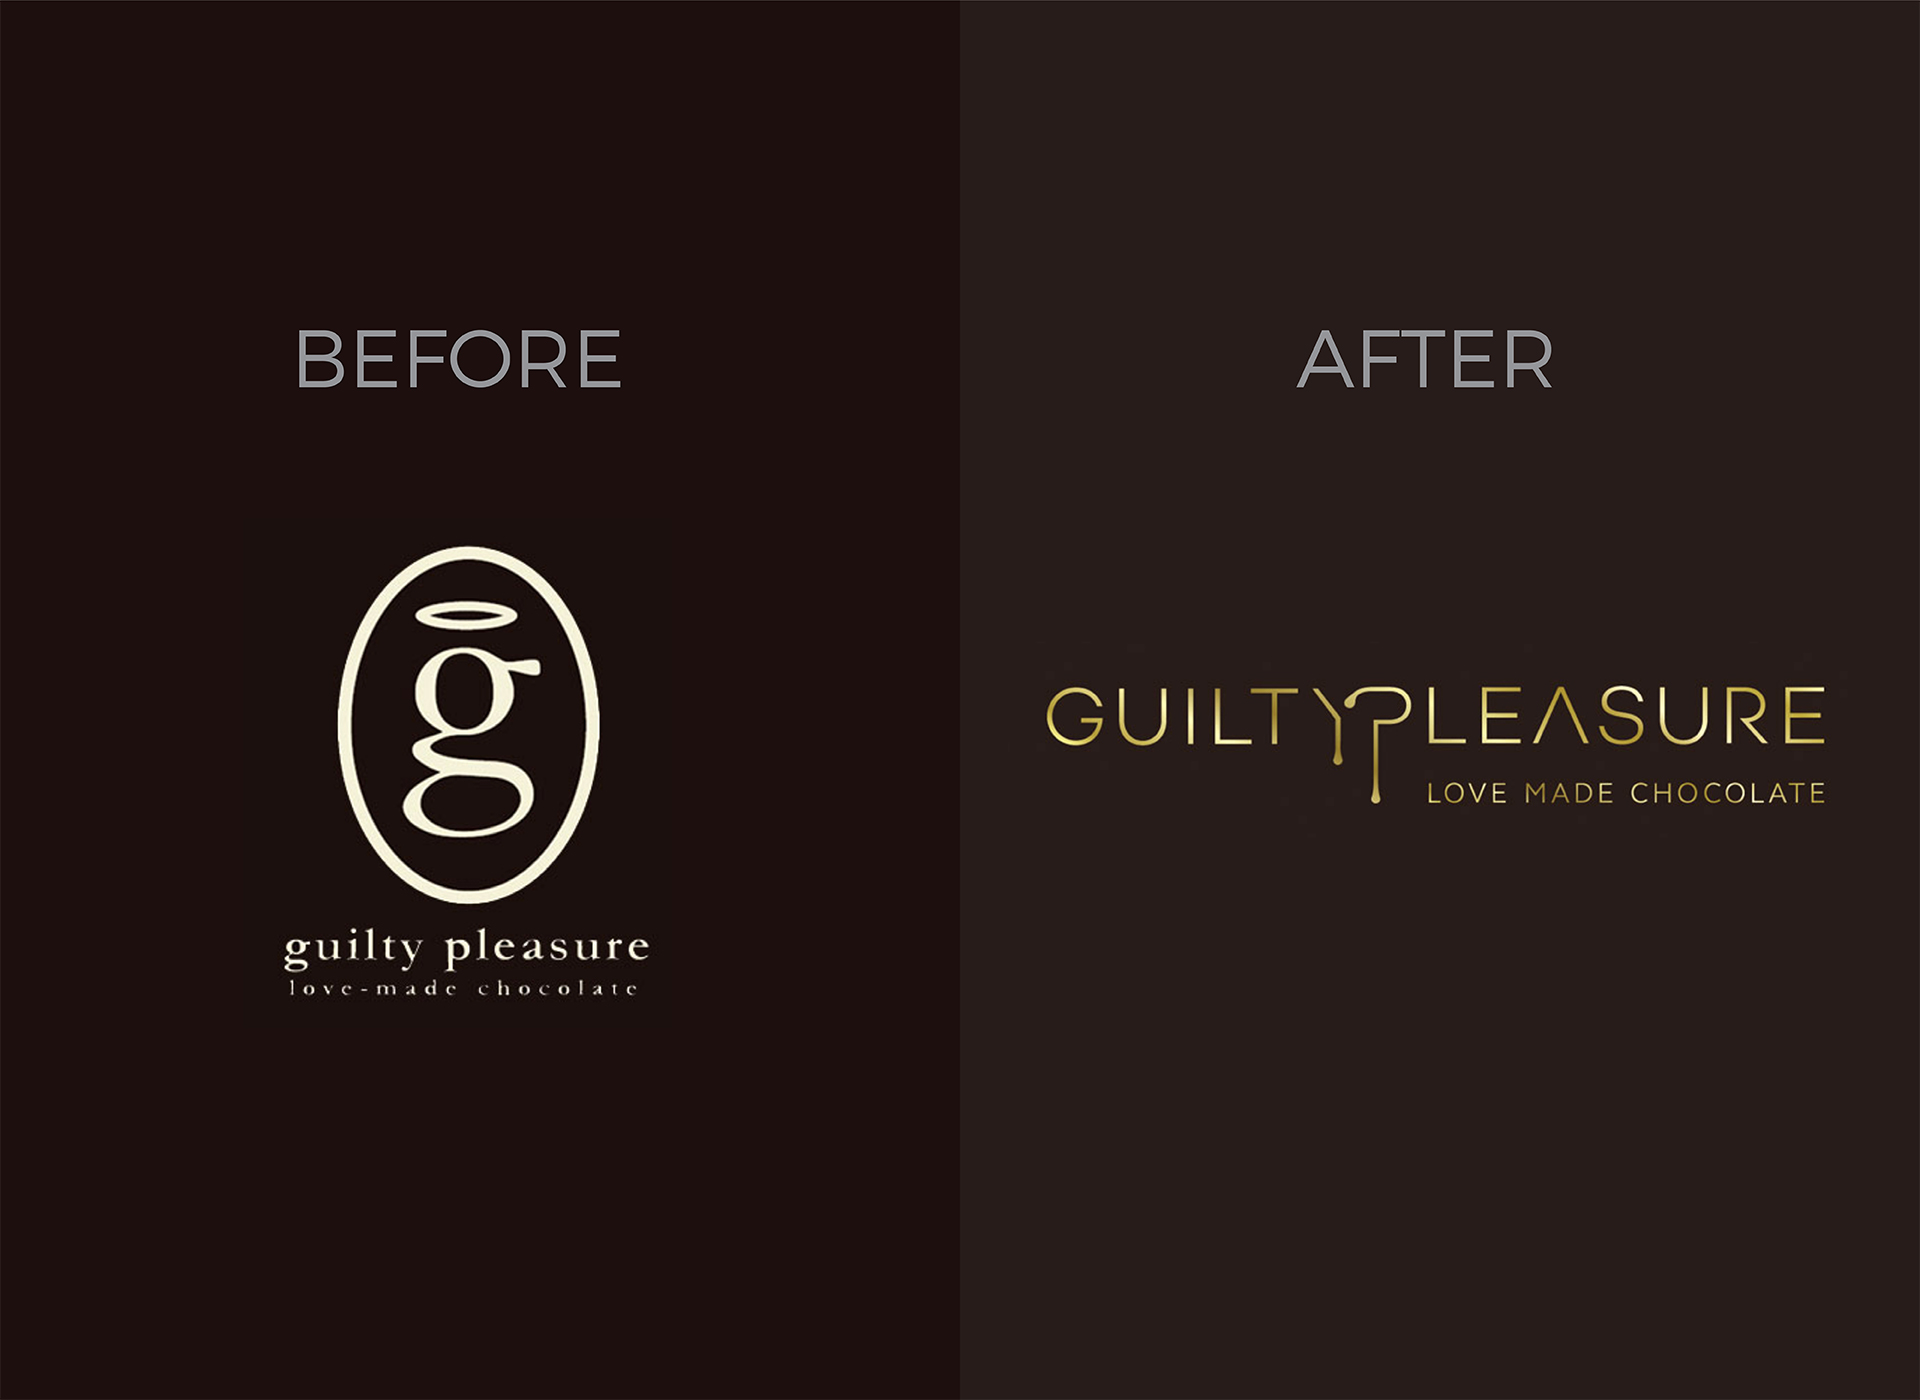 guilty pleasure architects rebranding logo before and after